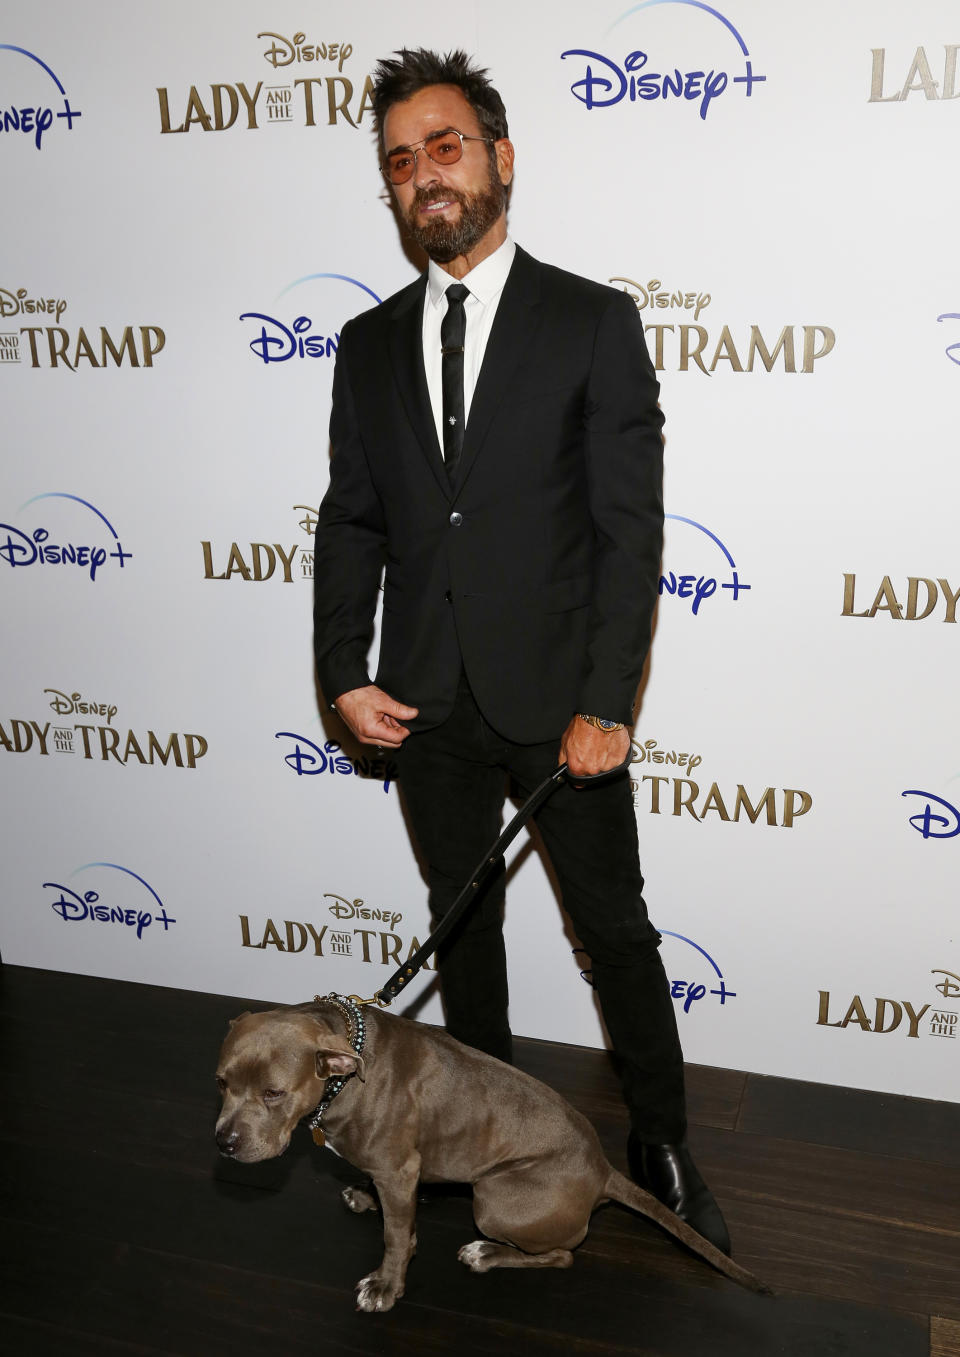 FILE - Justin Theroux attends a special screening of "Lady and the Tramp", hosted by Disney+ and The Cinema Society on Oct. 22, 2019, in New York. Theroux turns 49 on Aug. 10. (Photo by Andy Kropa/Invision/AP, File)